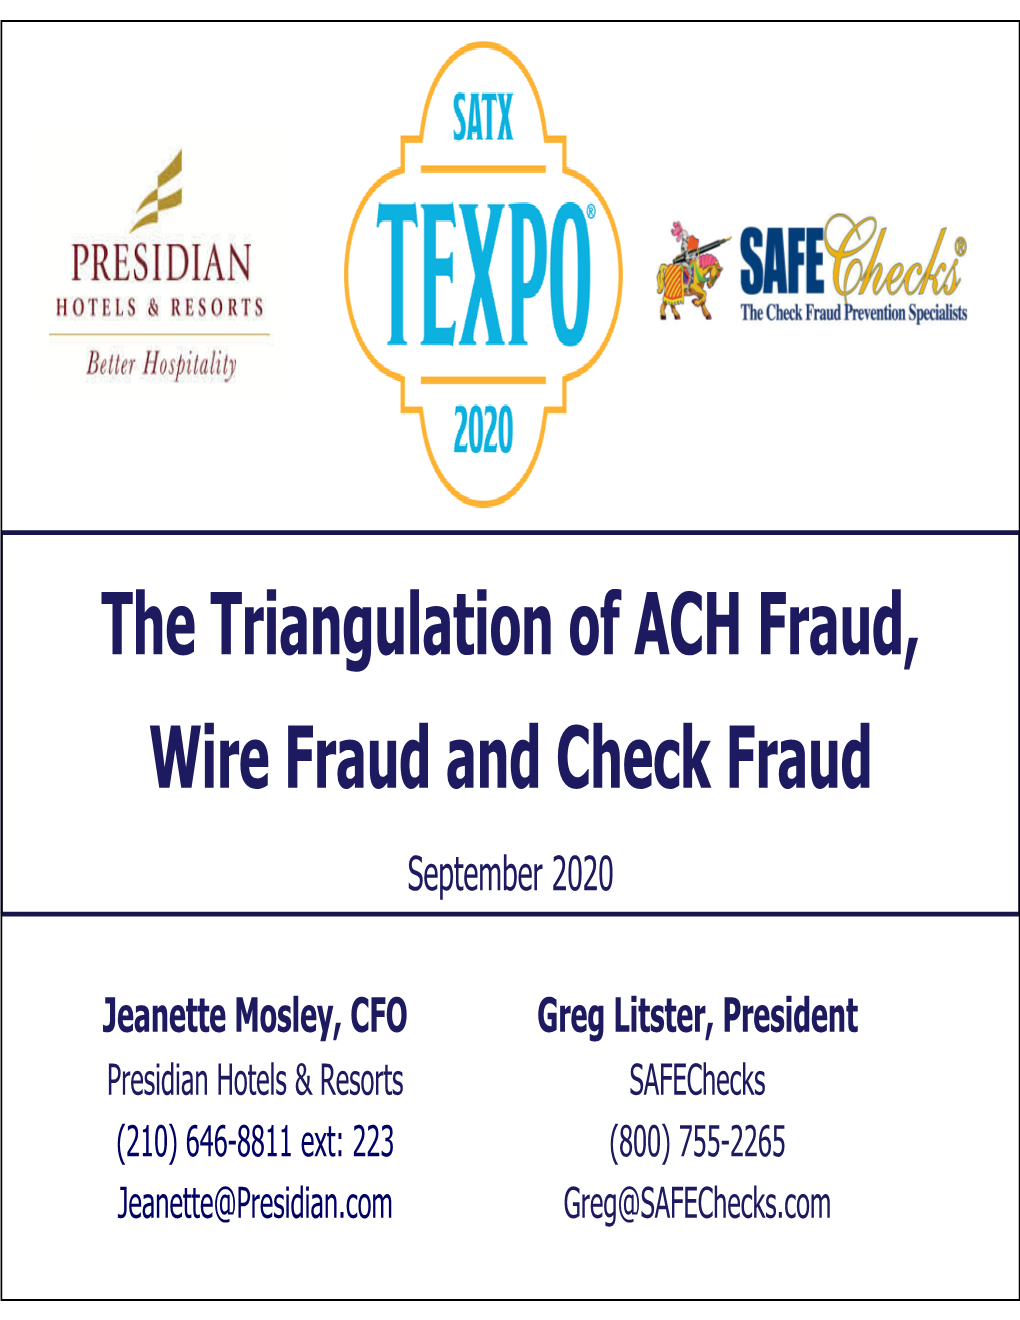 The Triangulation of ACH Fraud, Wire Fraud and Check Fraud September 2020